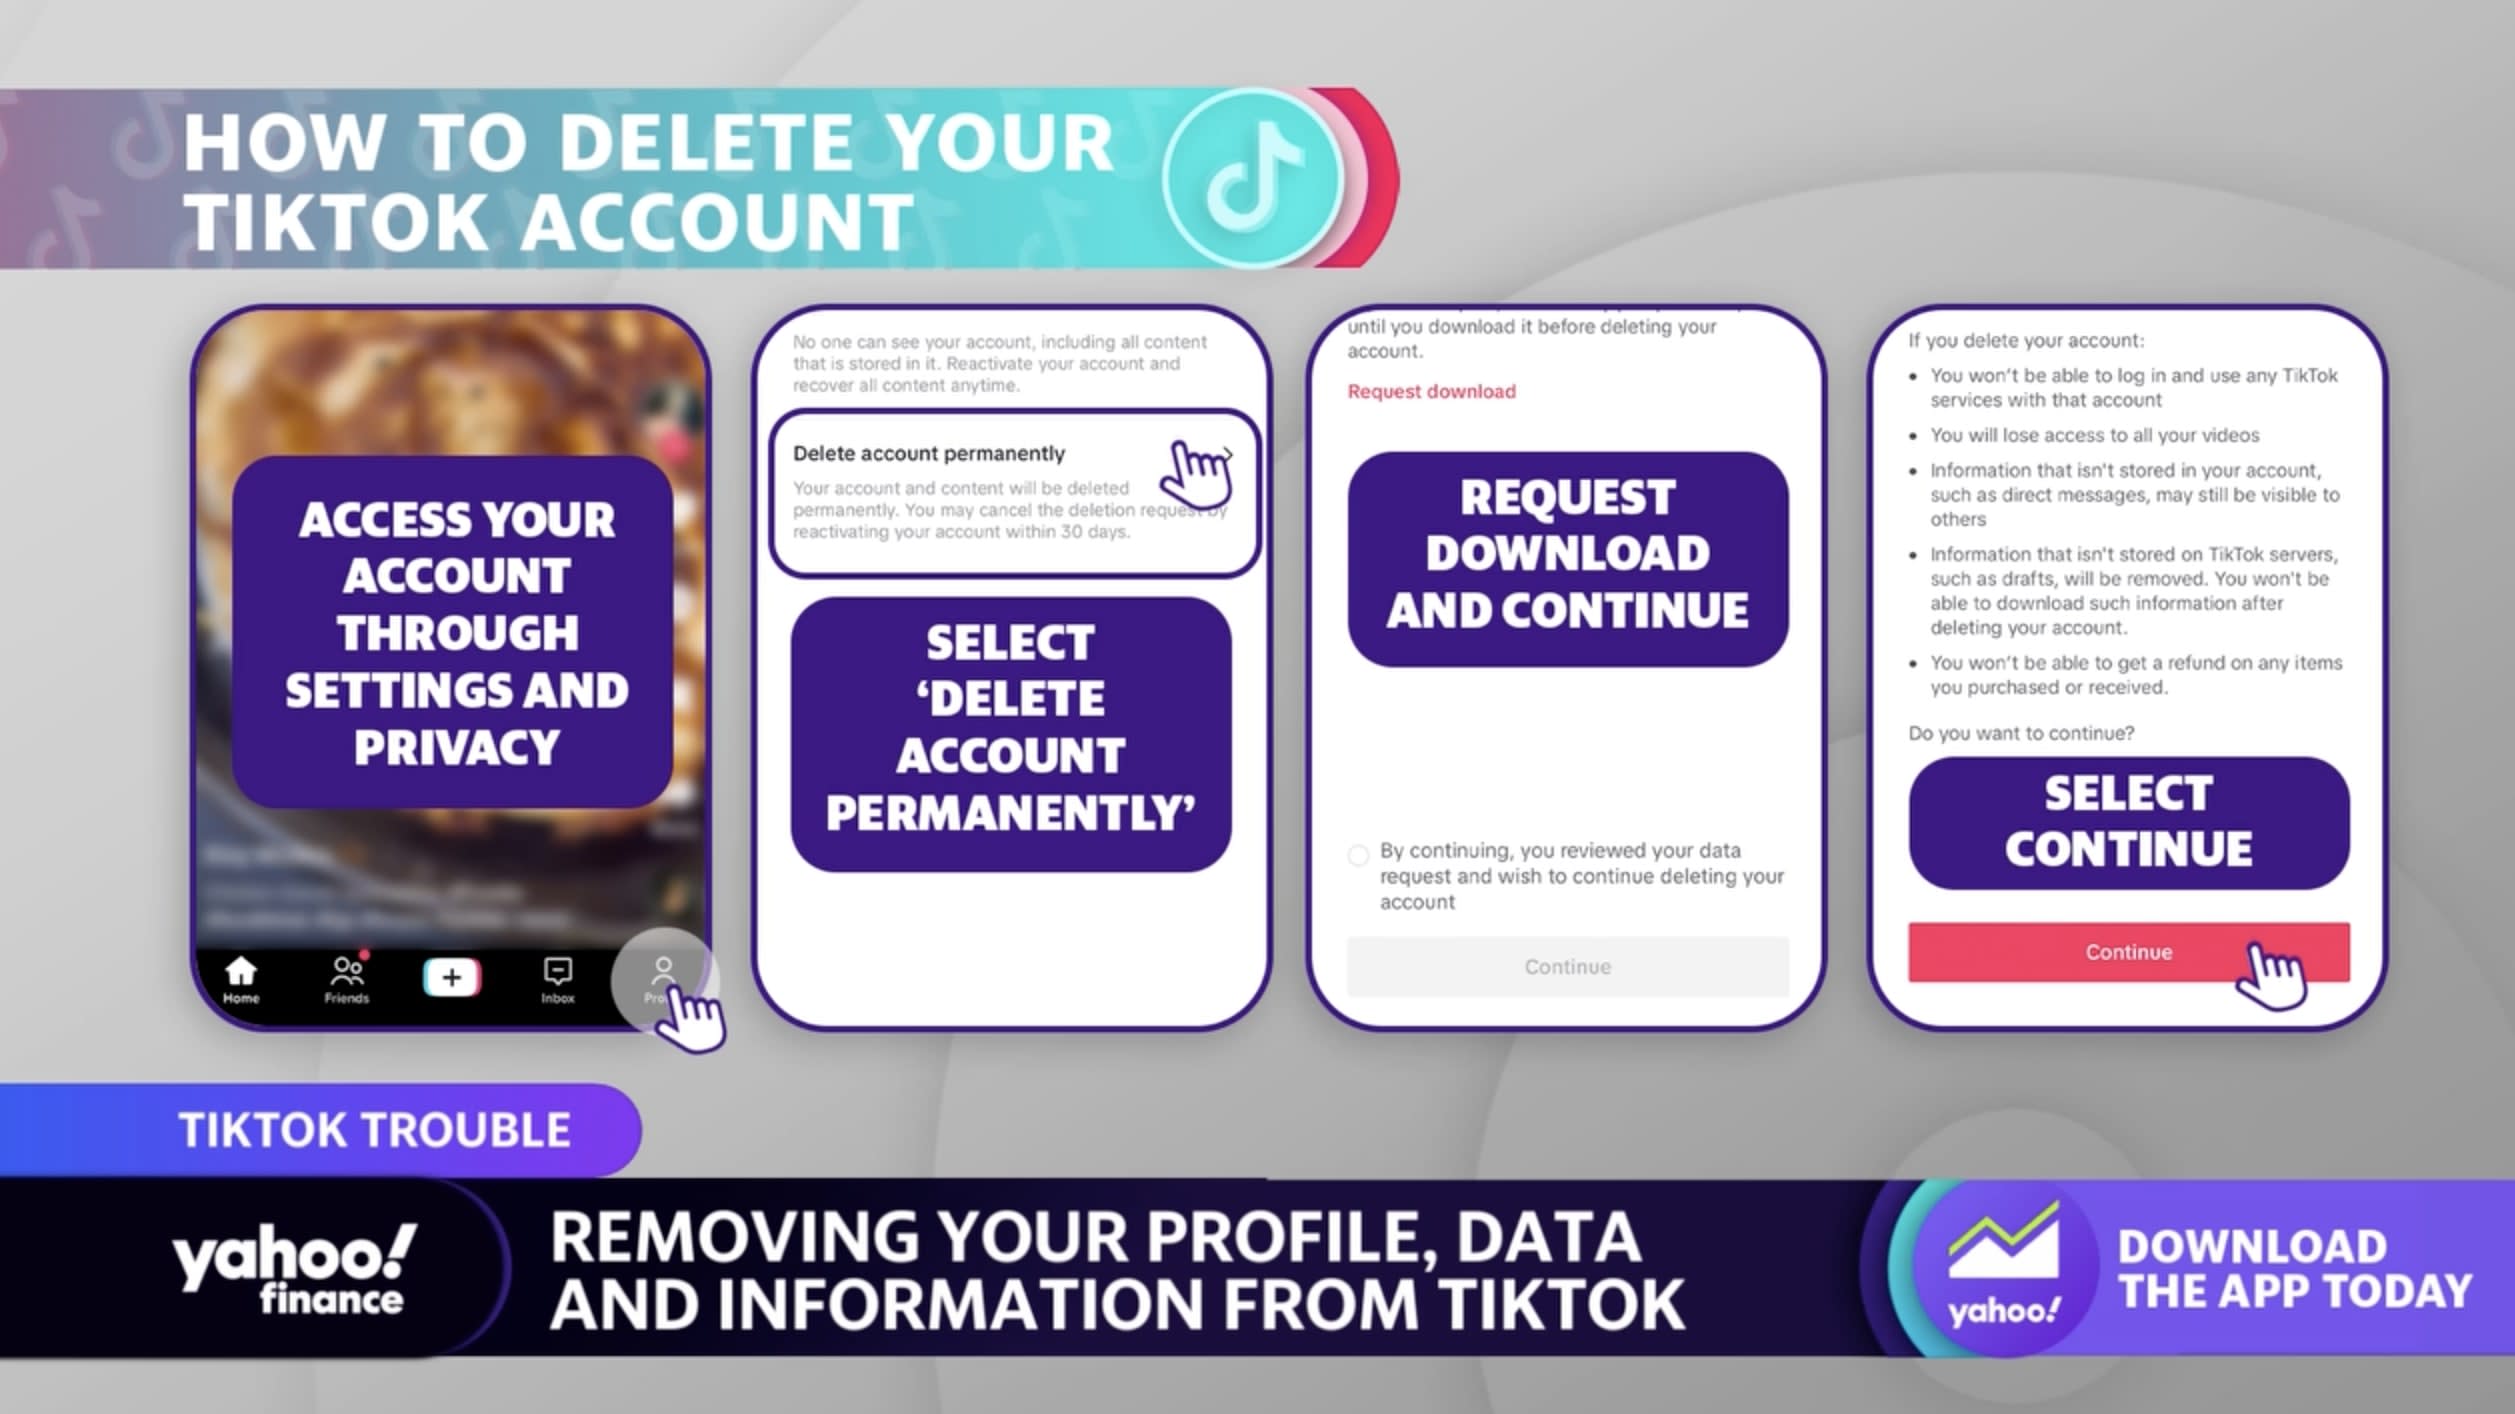 How to delete your profile, data from TikTok